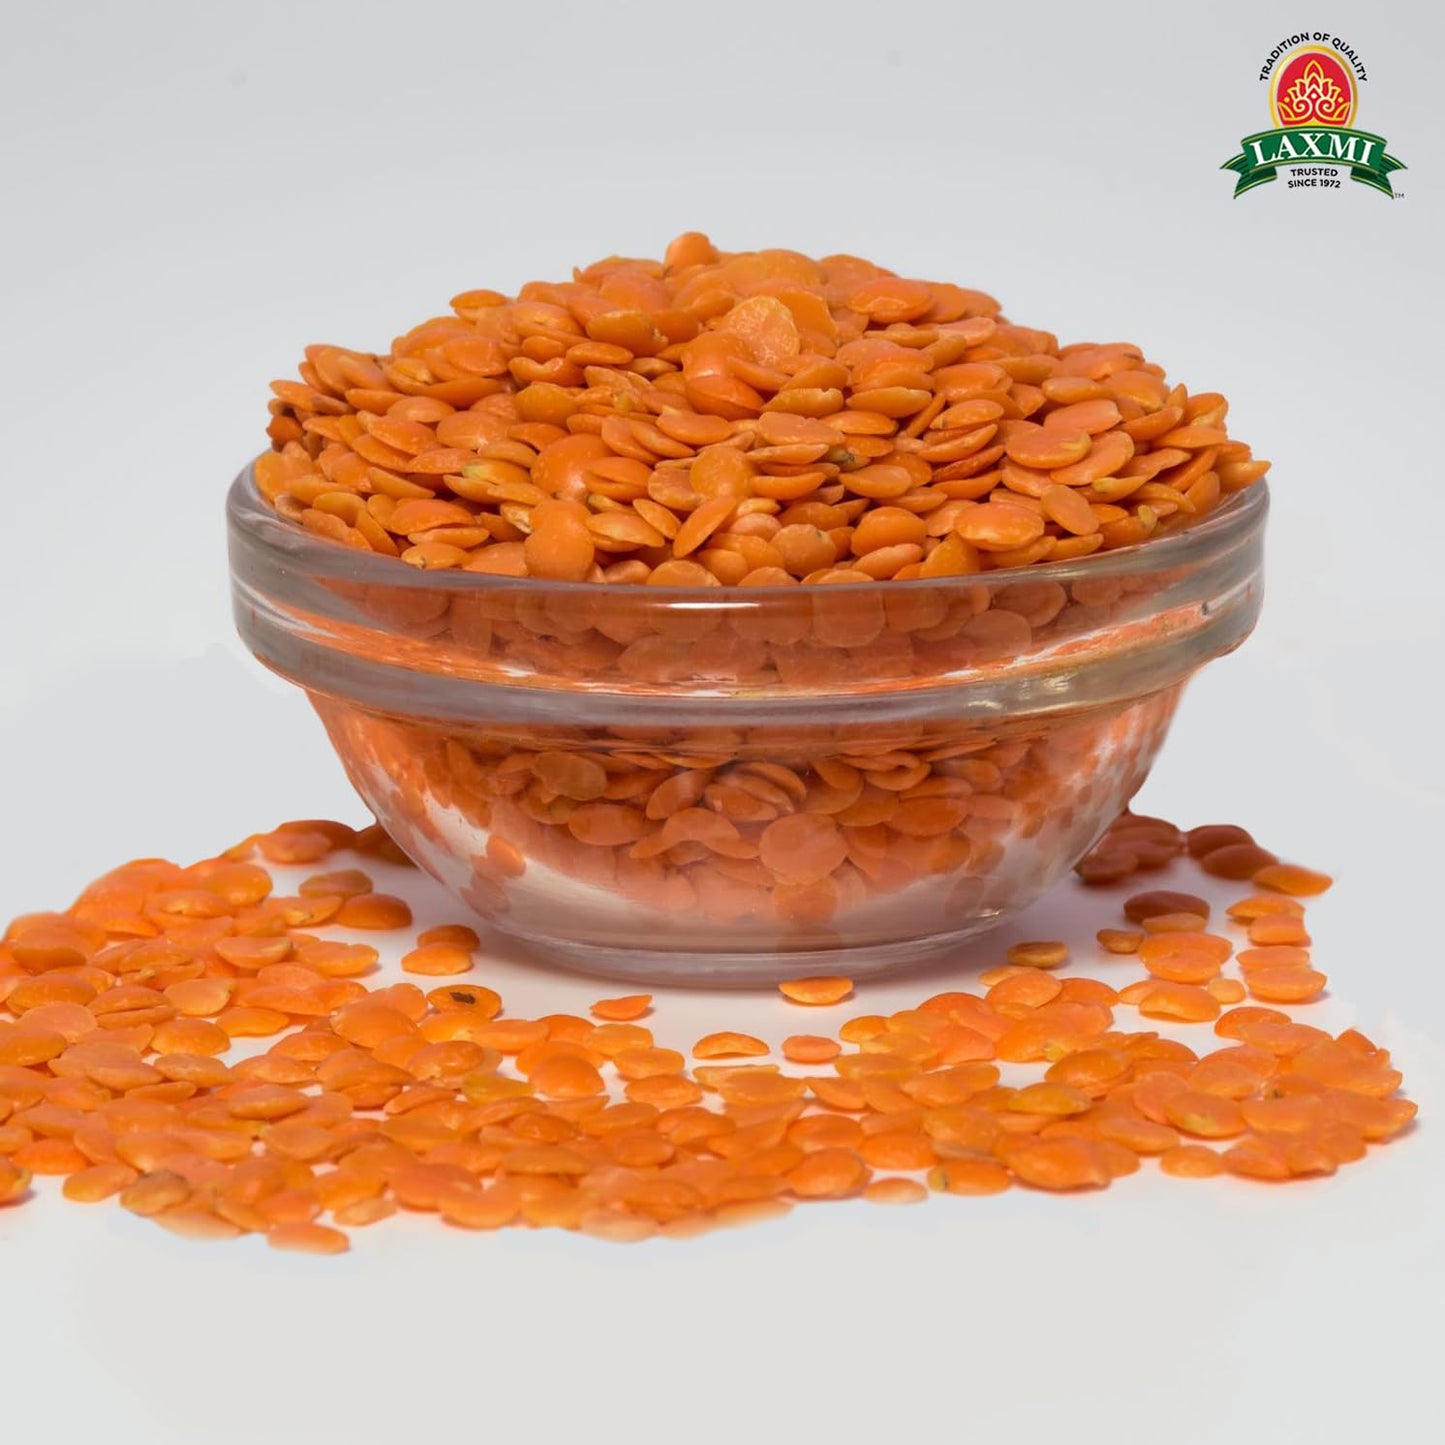 Laxmi Masoor Dal or Red Lentils, 2lbs | Pure Masoor dal lentils | Premium split red lentils | A Natural source of protein